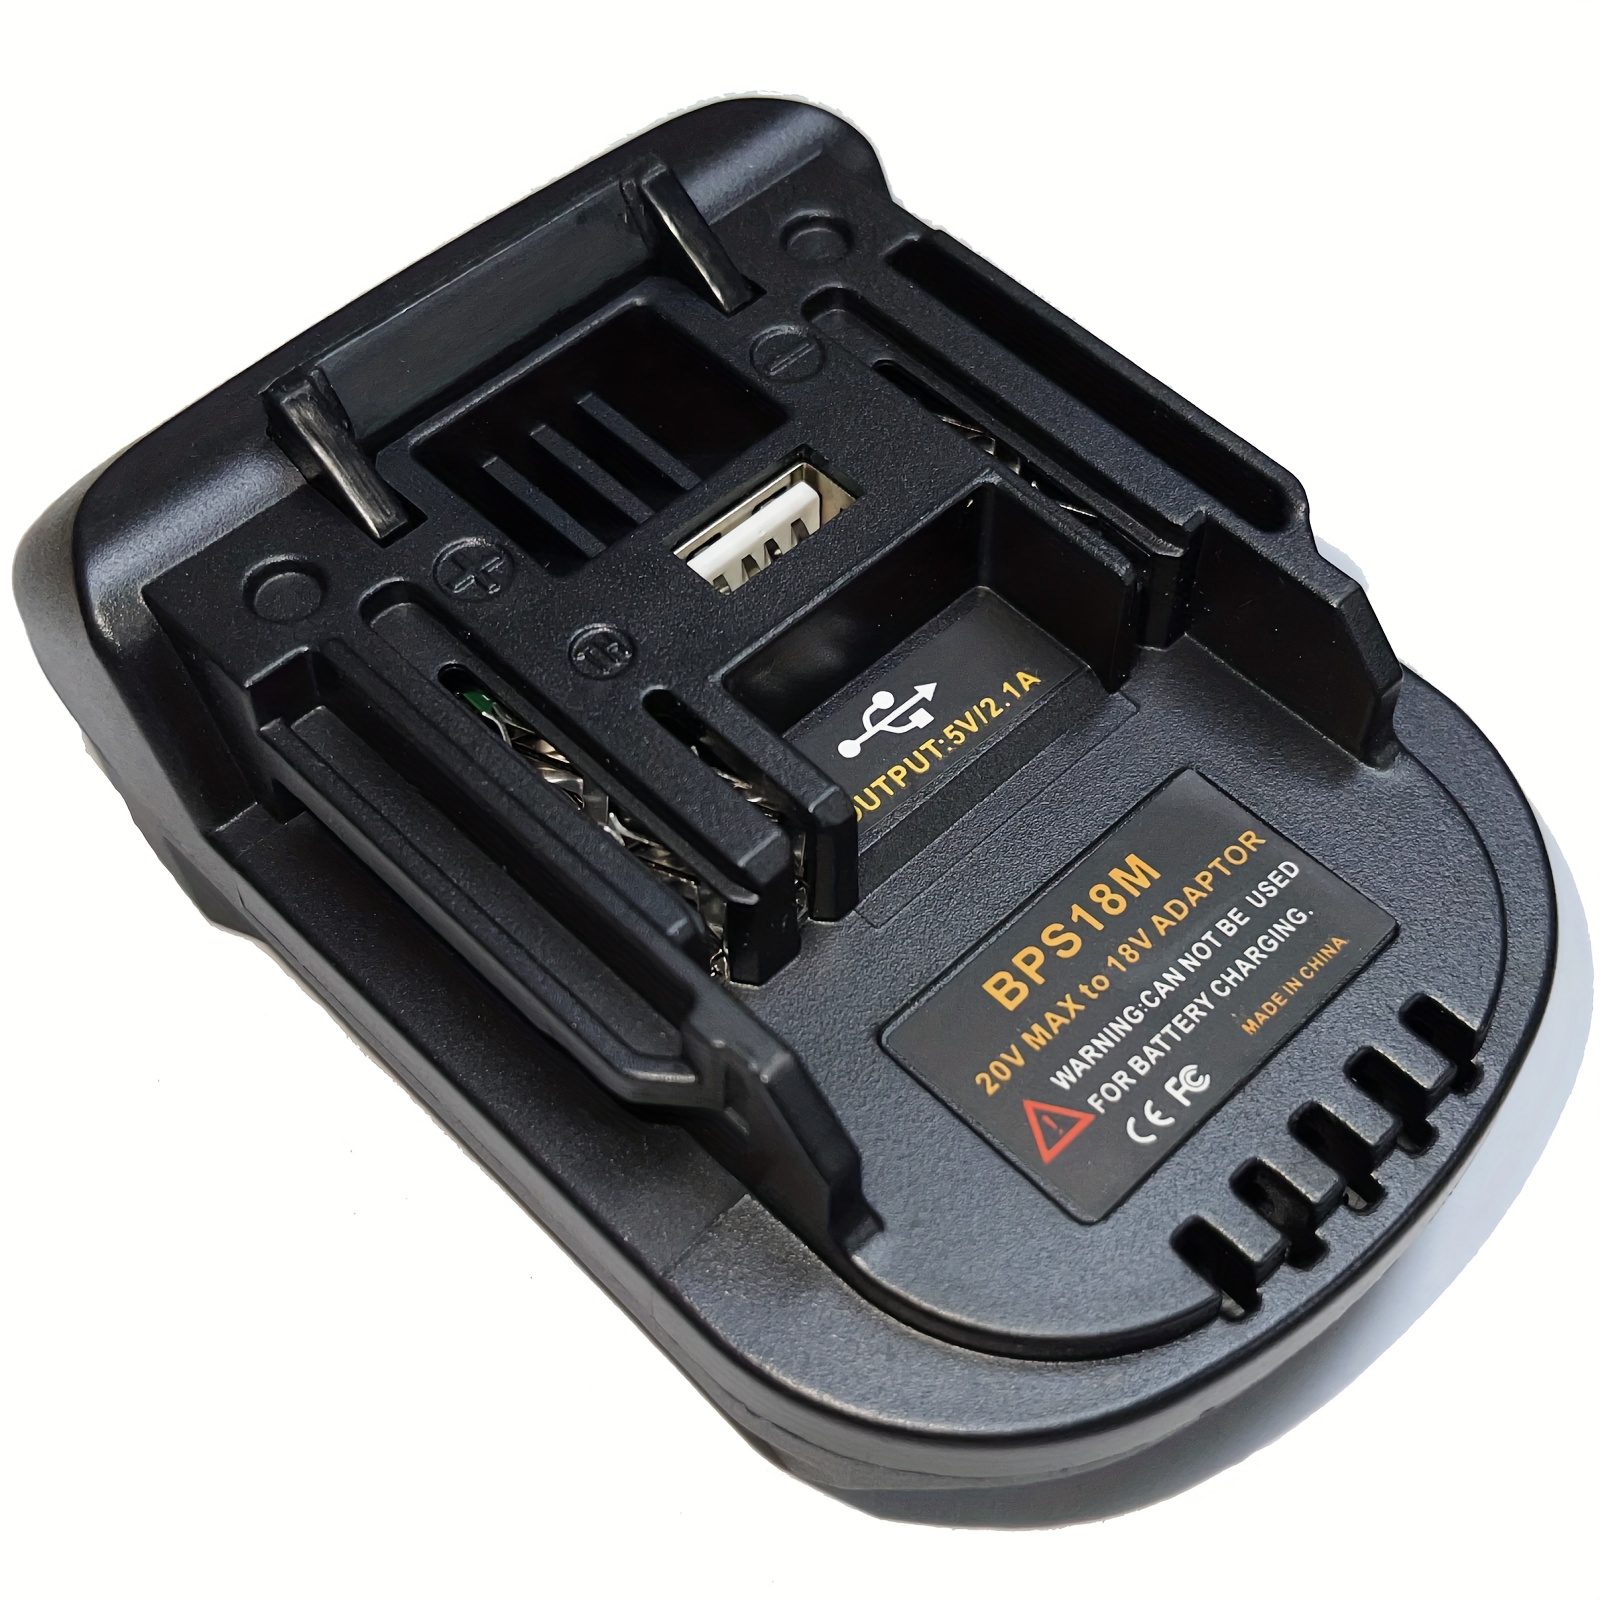 Replacement battery Charger nicd nimh dual use for Black Decker 9.6V-18V  rechargeable battery HPB18-OPE HPB18 HPB14 HPB12 HPB96